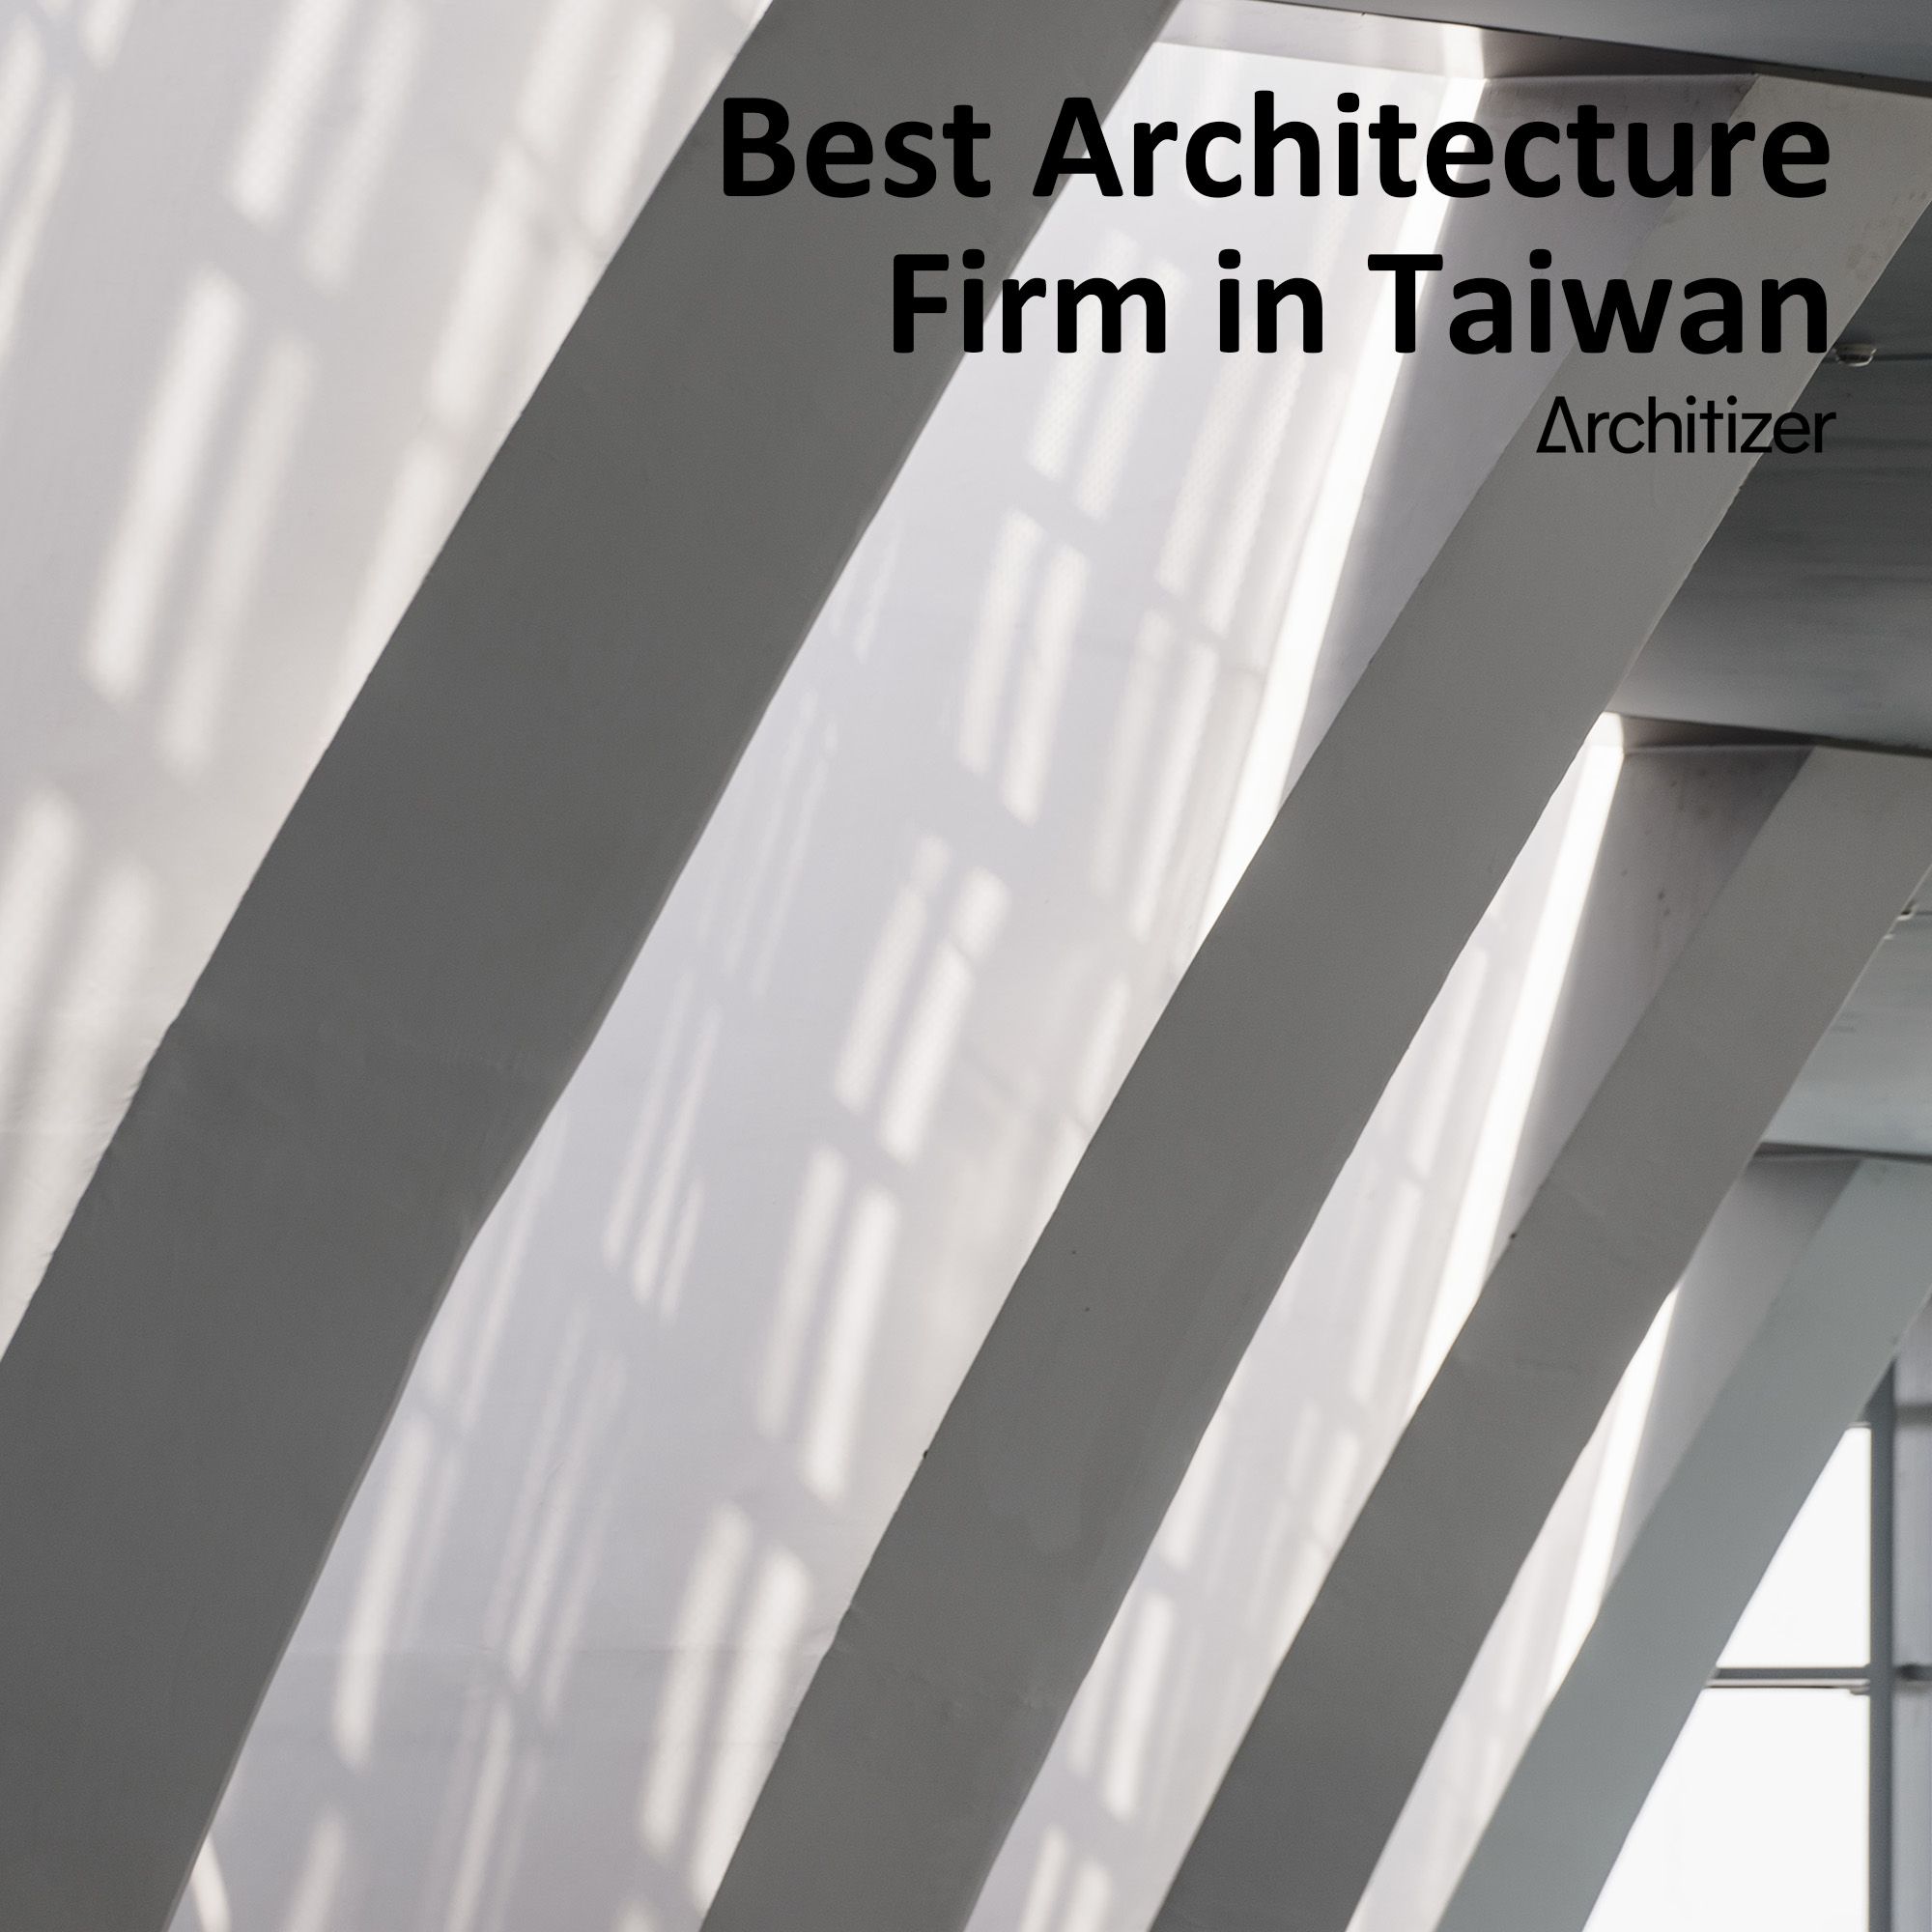 KRIS YAO | ARTECH has been ranked 1st in the Architizer "30 Best Architecture Firms in Taiwan"